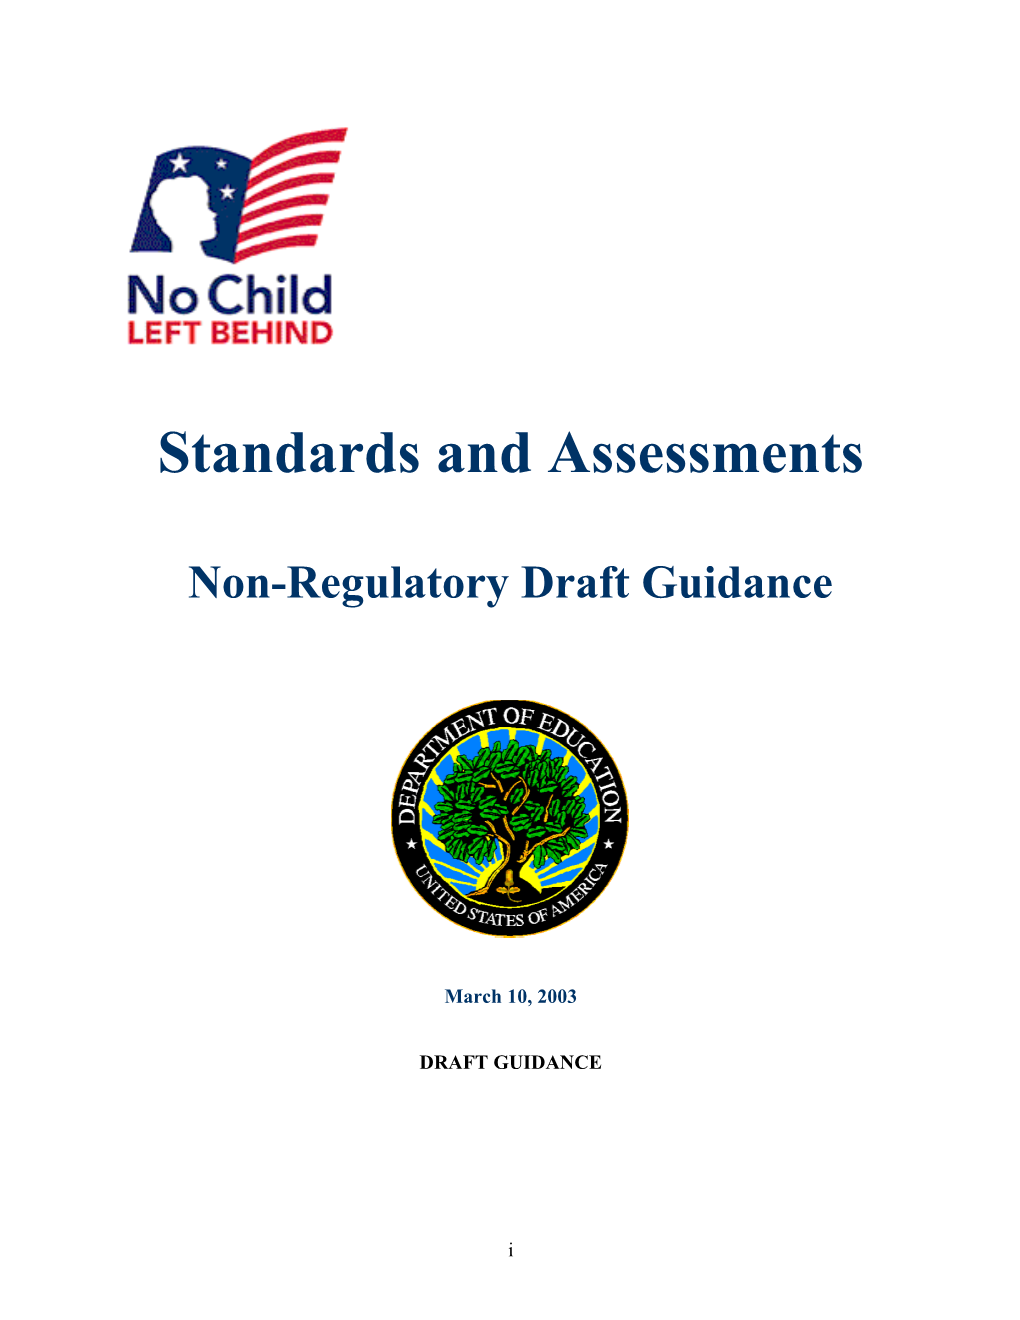 Standards and Assessments Non-Regulatory Draft Guidance (MS WORD)